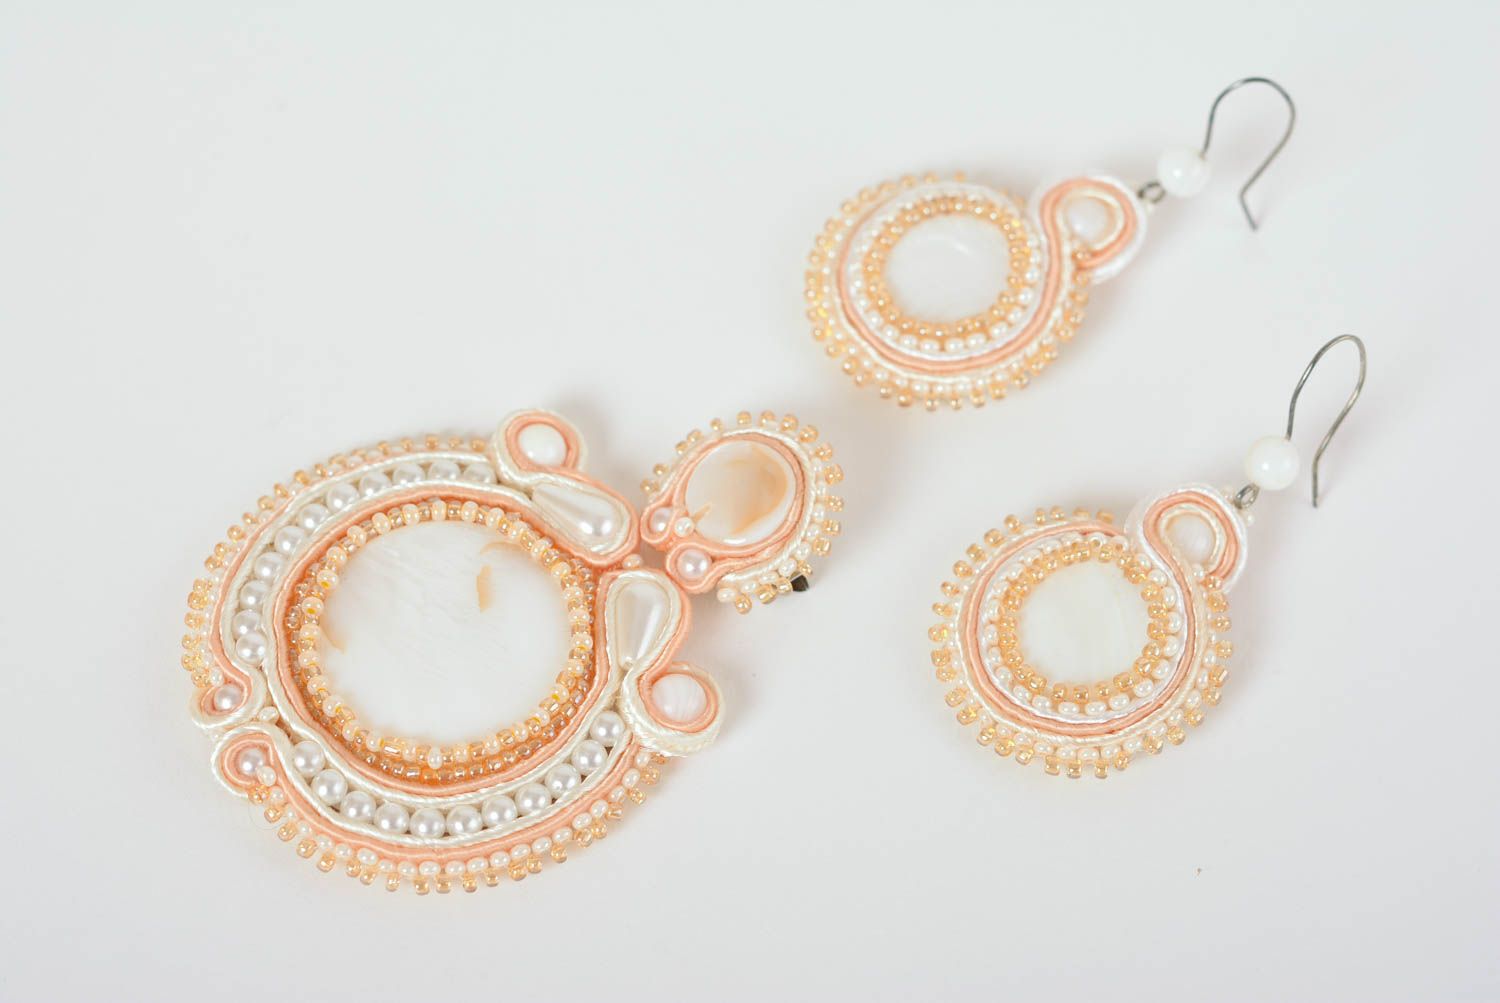 Handmade soutache jewelry soutache brooch and earrings accessories with stones photo 3